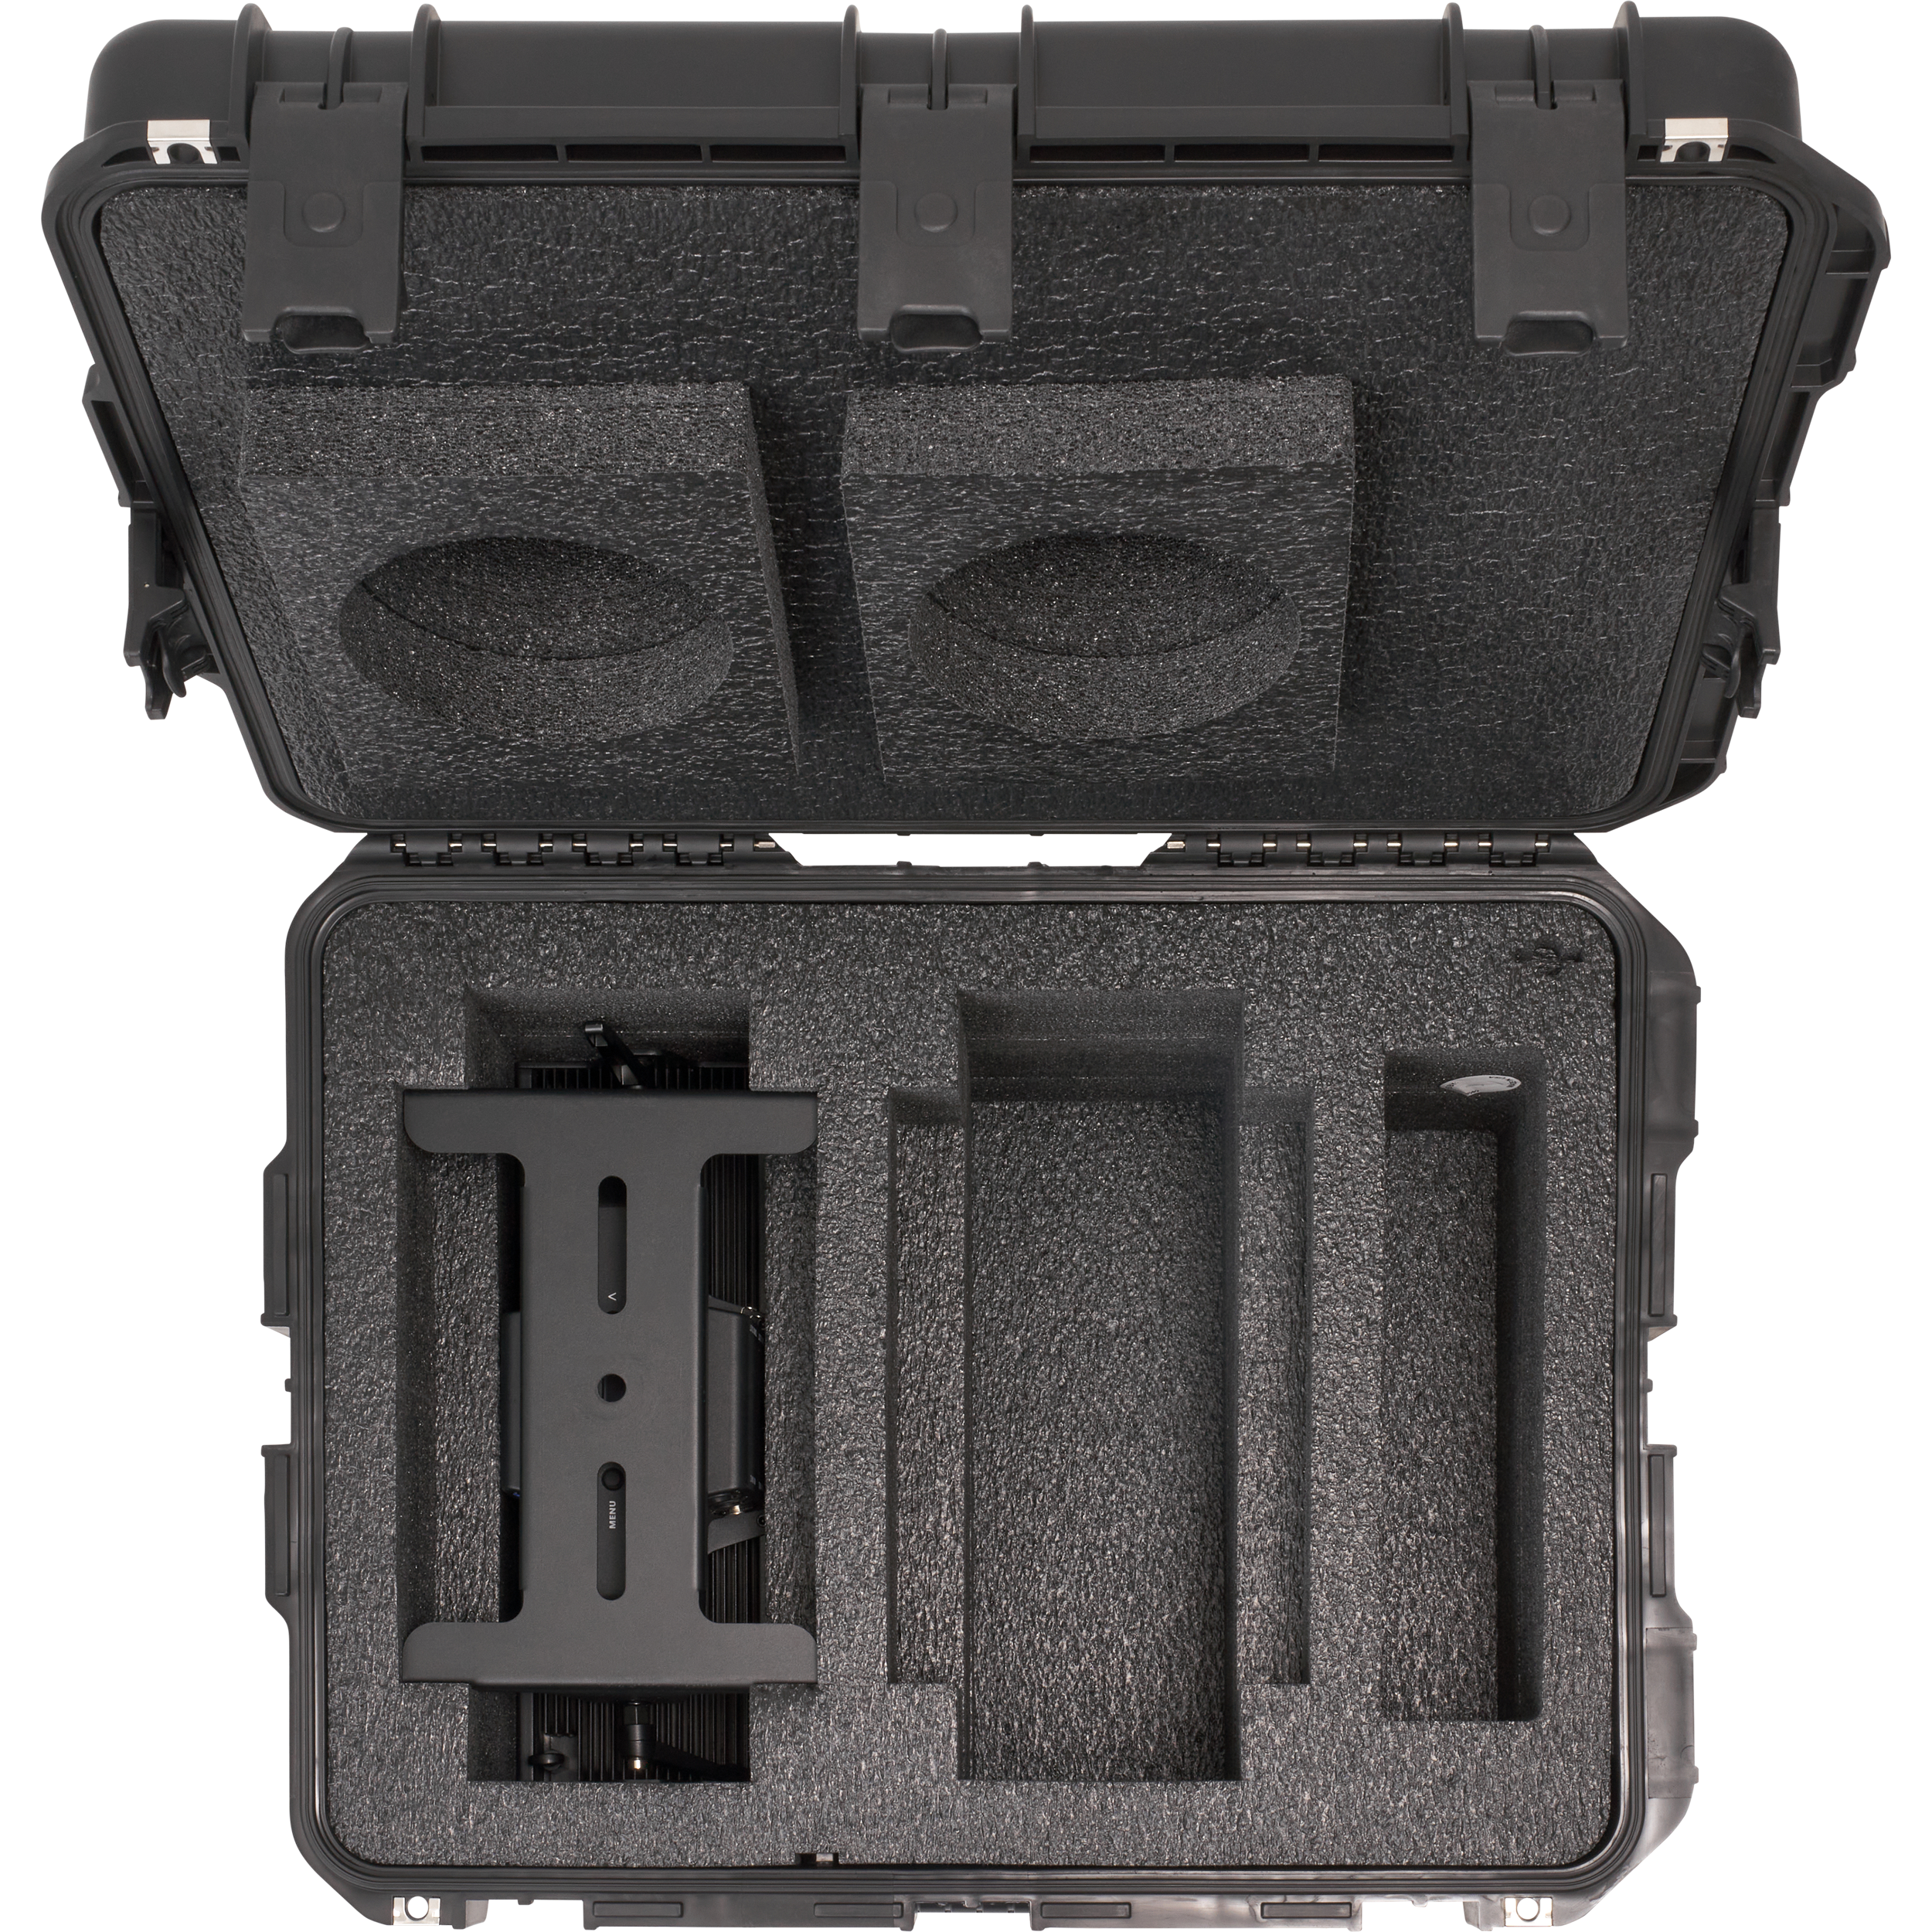 BYFP ipCase for 2x Chauvet Ovation B565